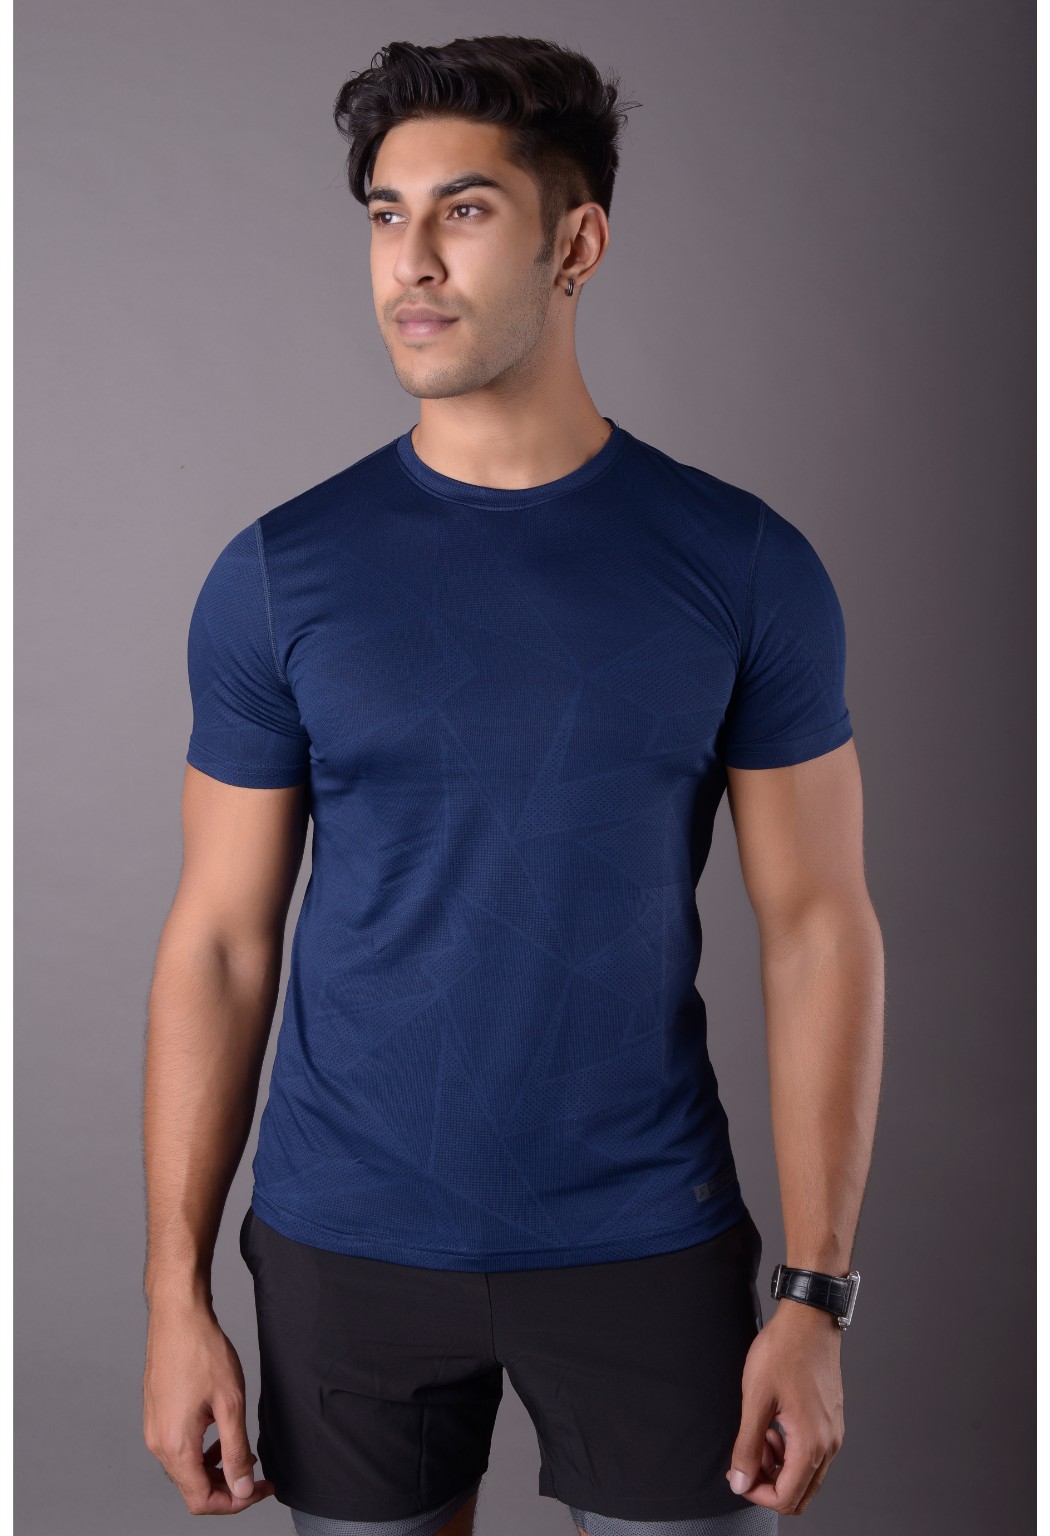 Flux Tee – Navy Blue – Fitlethics